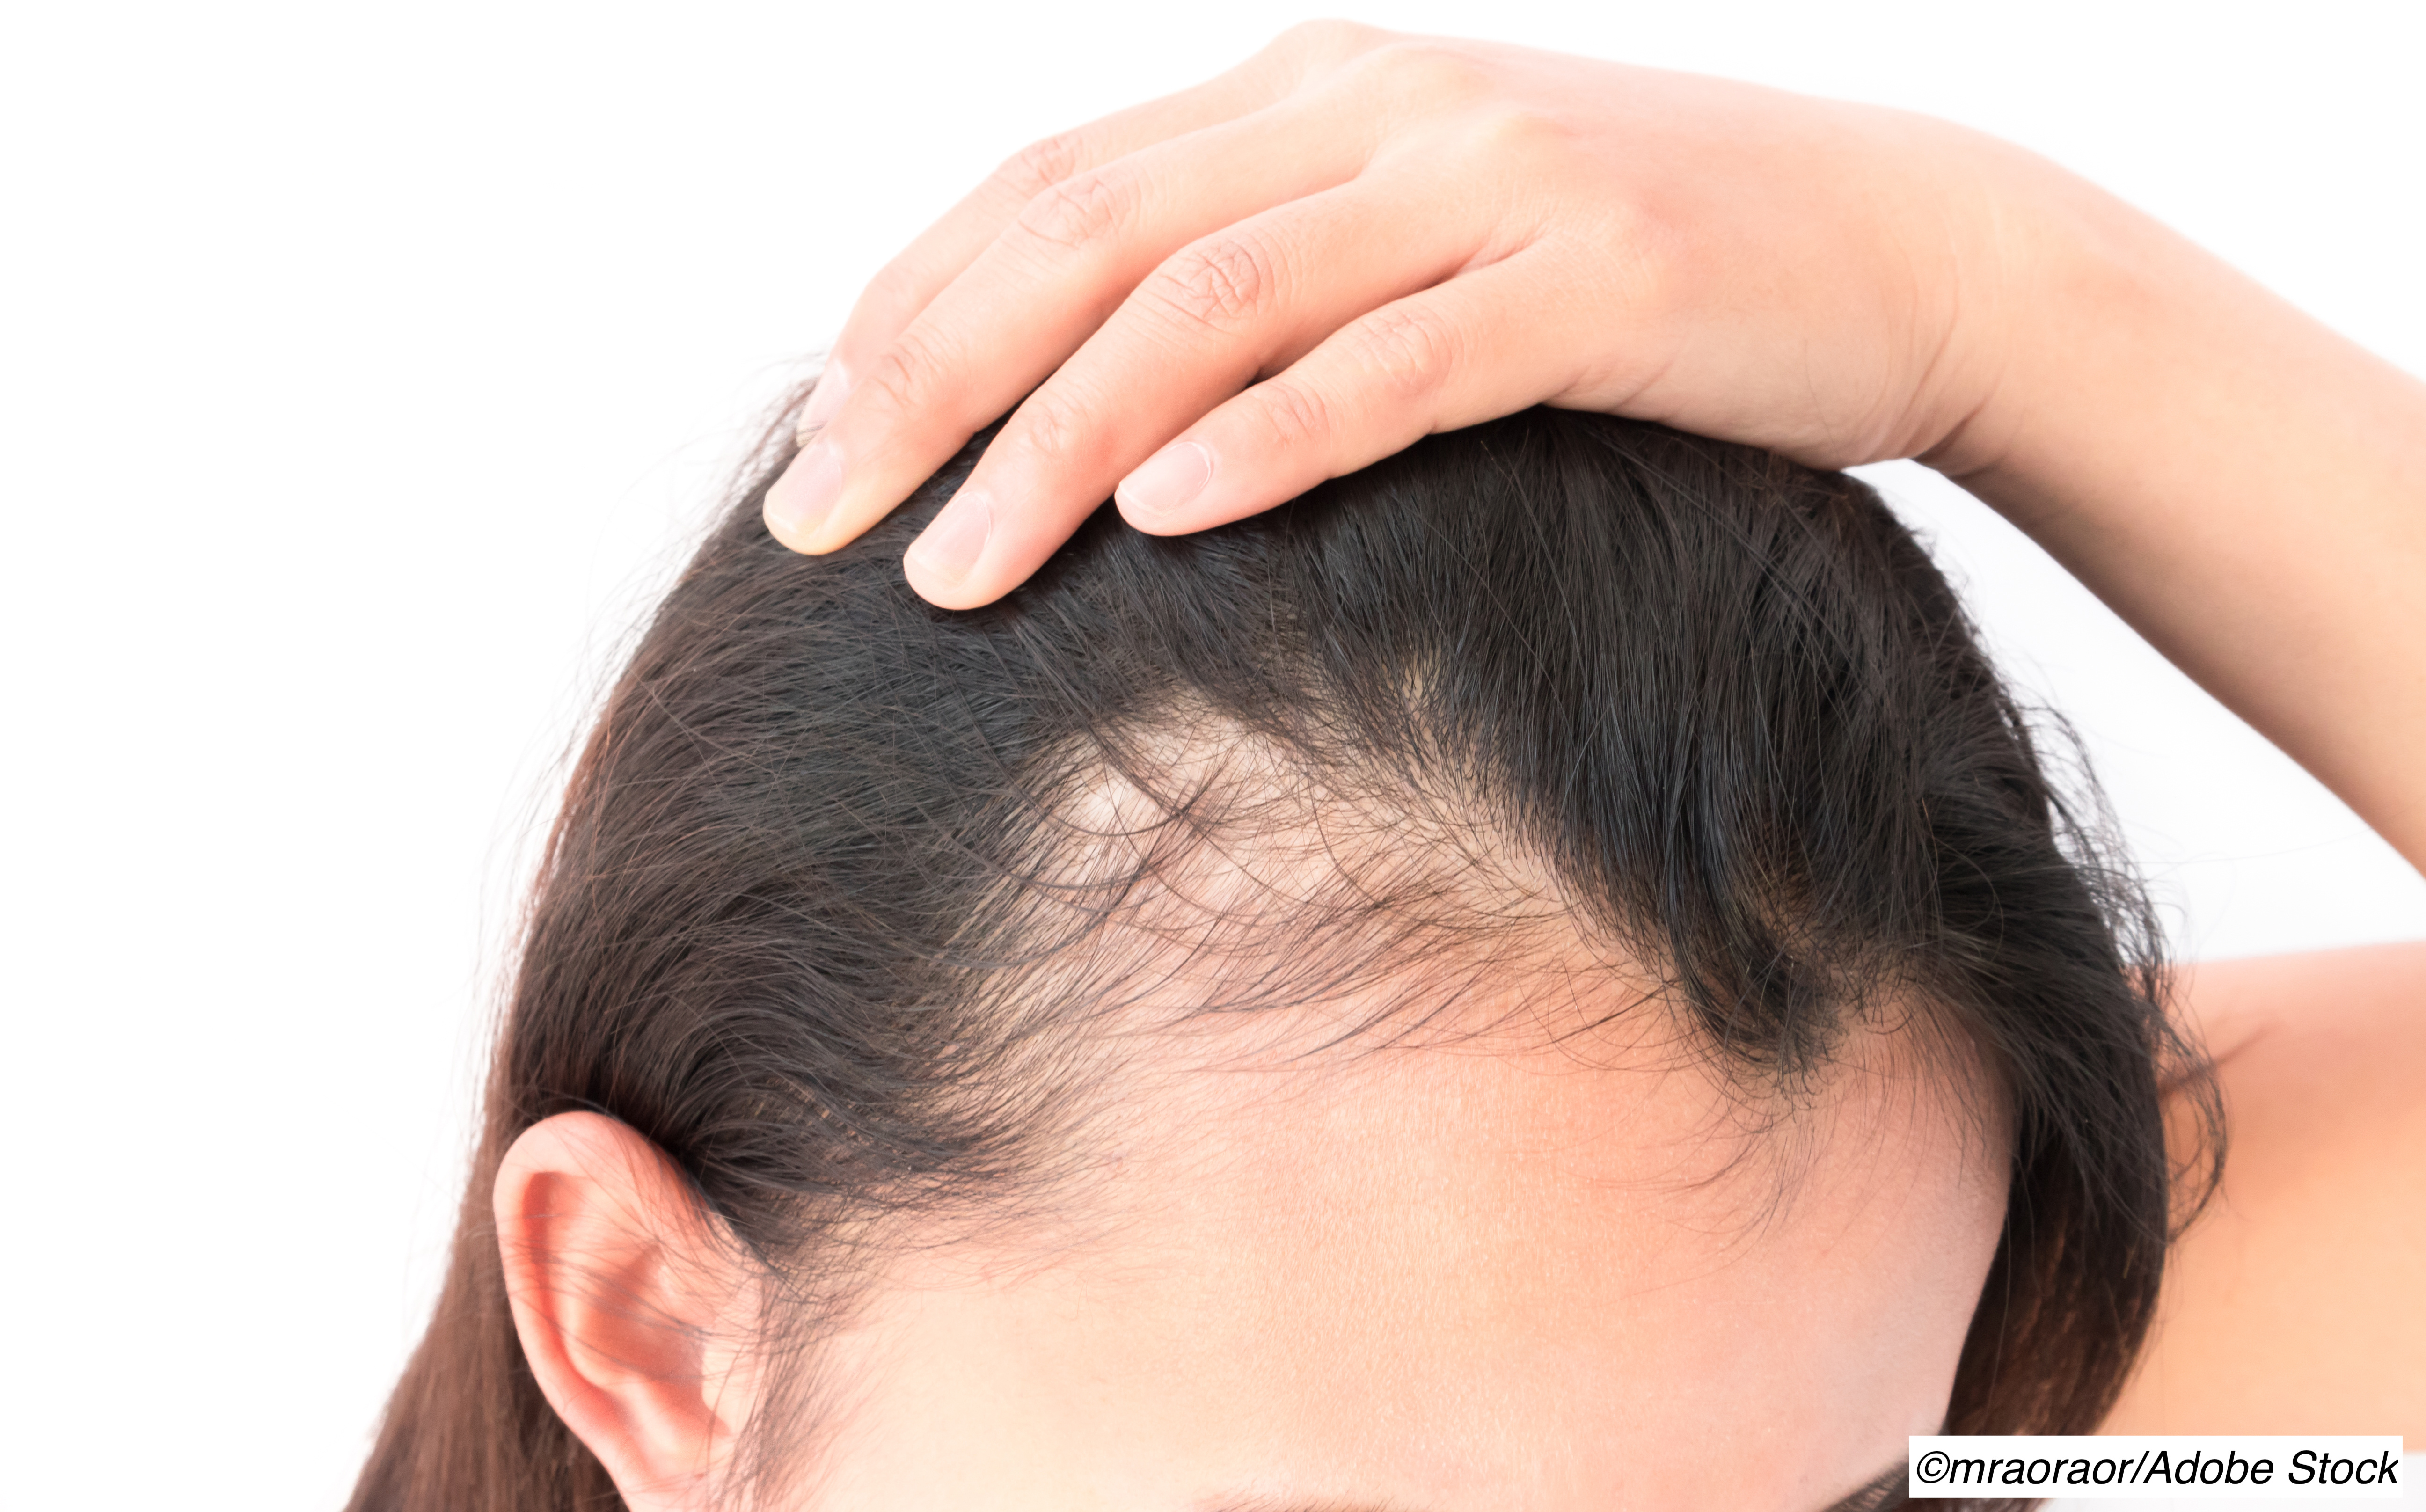 Low-Dose Oral Minoxidil Deemed Safe for Hair Growth